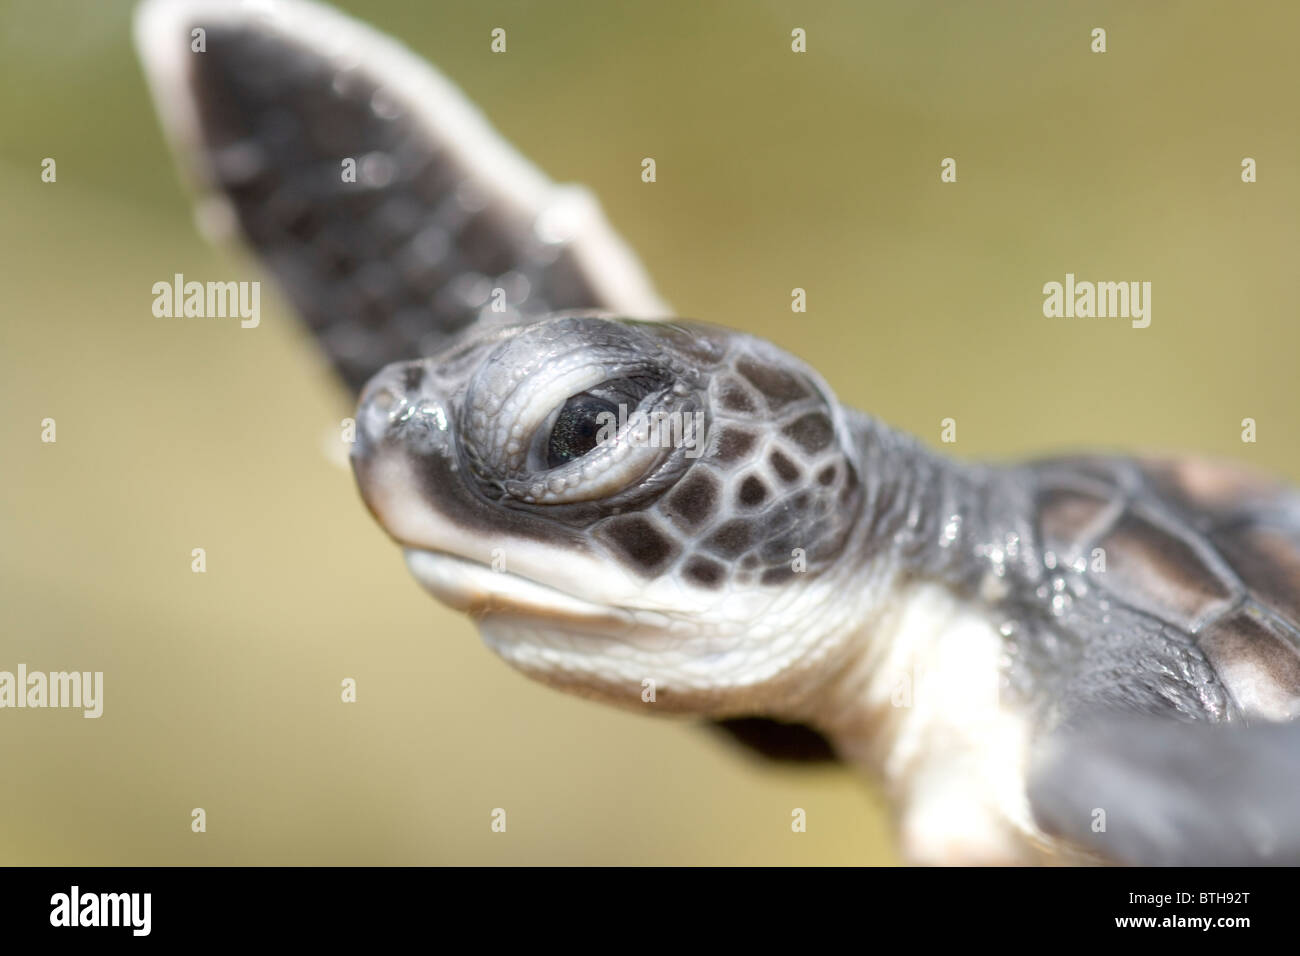 Green Turtle (Chelonia mydas). Hatchling showing head and a front flipper. Stock Photo